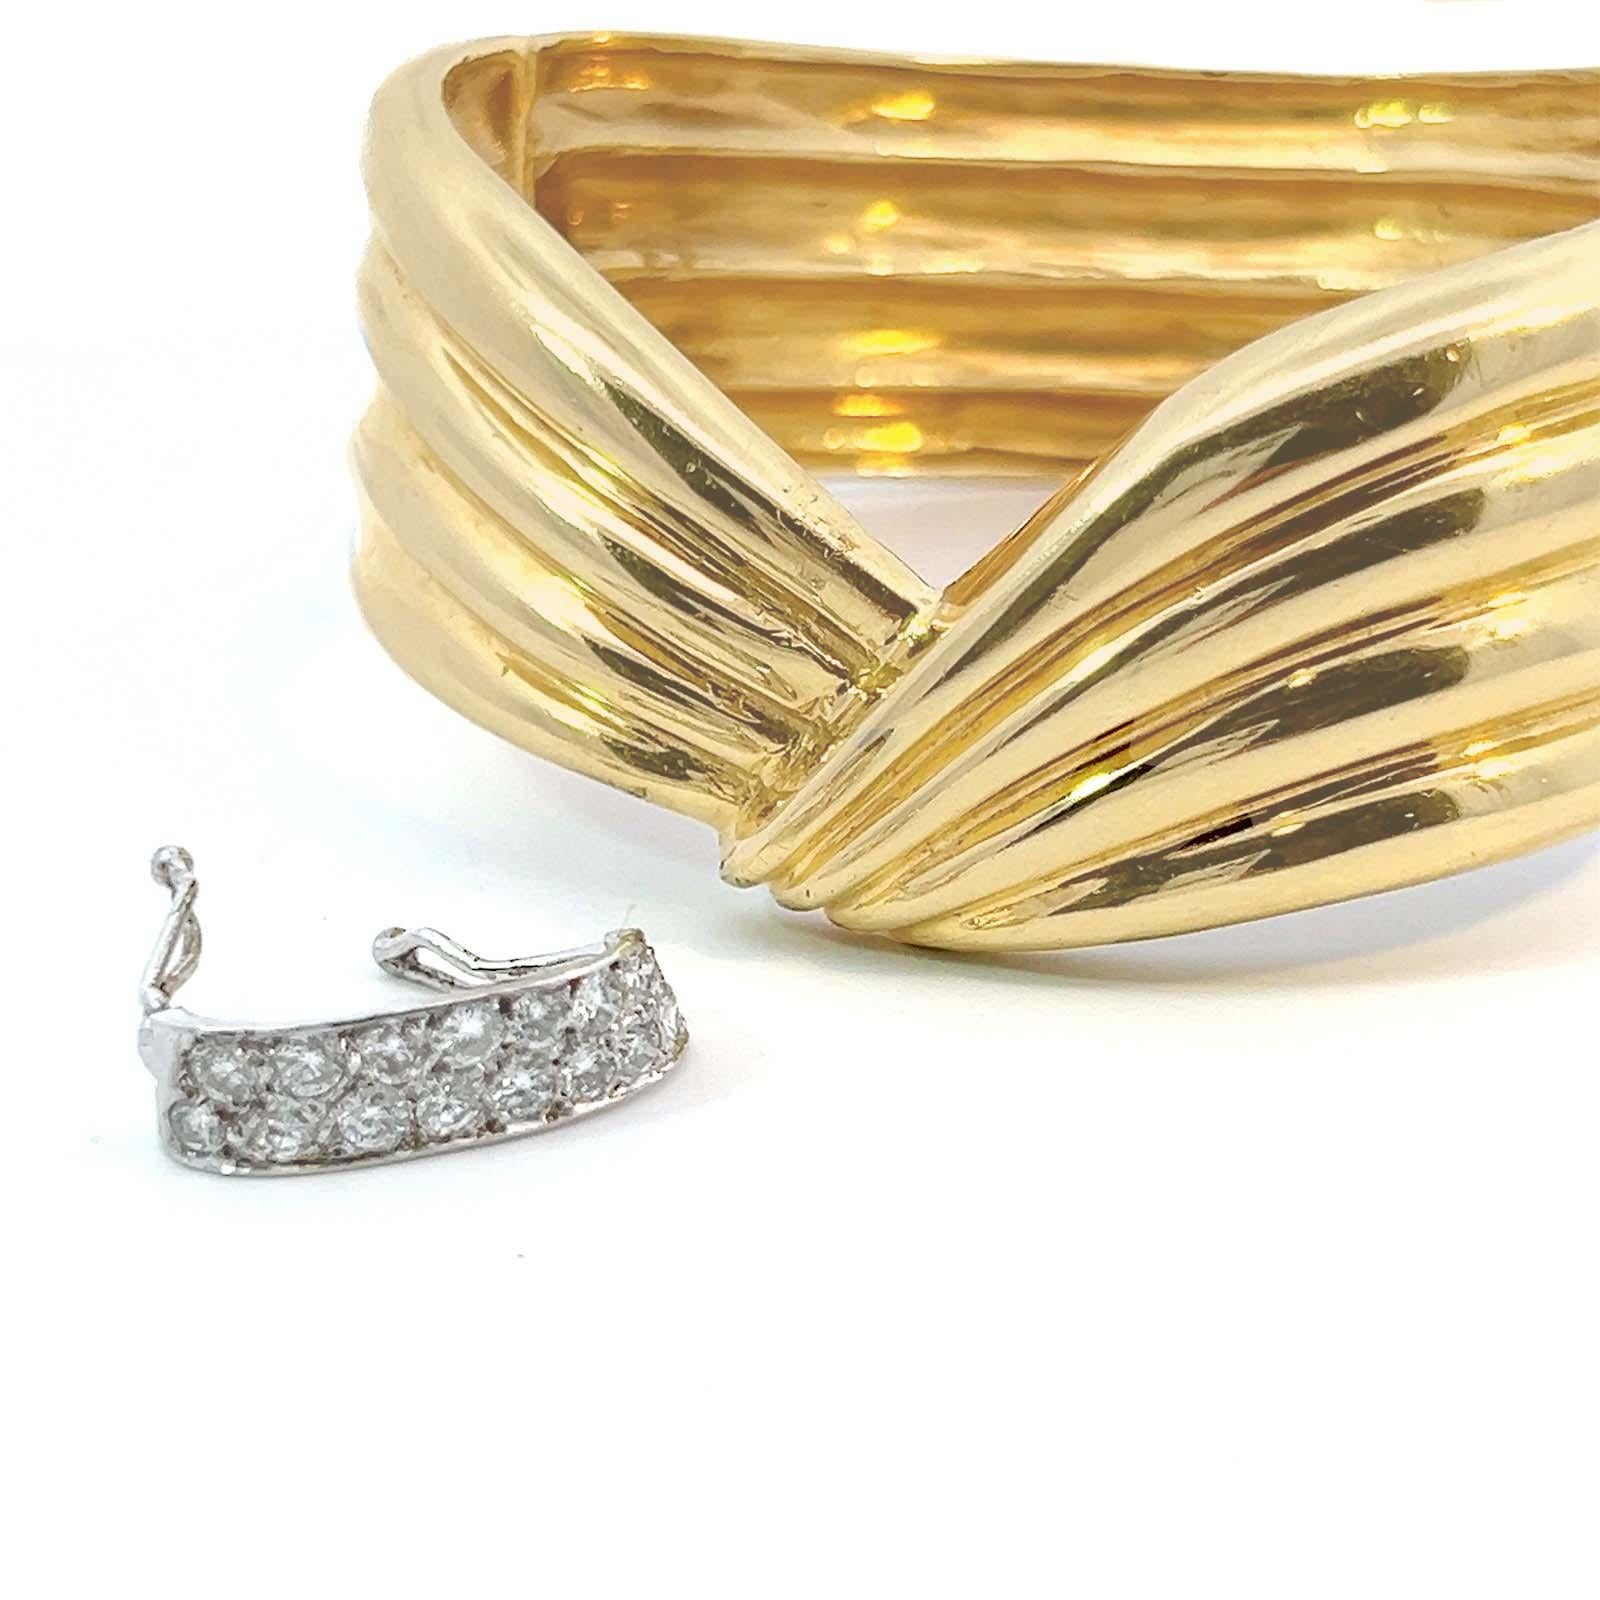 Late 20th Century, 1980's, vintage 0.75 ctw. diamond bangle bracelet in 14k yellow and white gold. The day/night-style design features a cinched bracelet gleaming in 14k yellow gold sparked with a stripe of 15 round brilliant cut diamonds, G-I